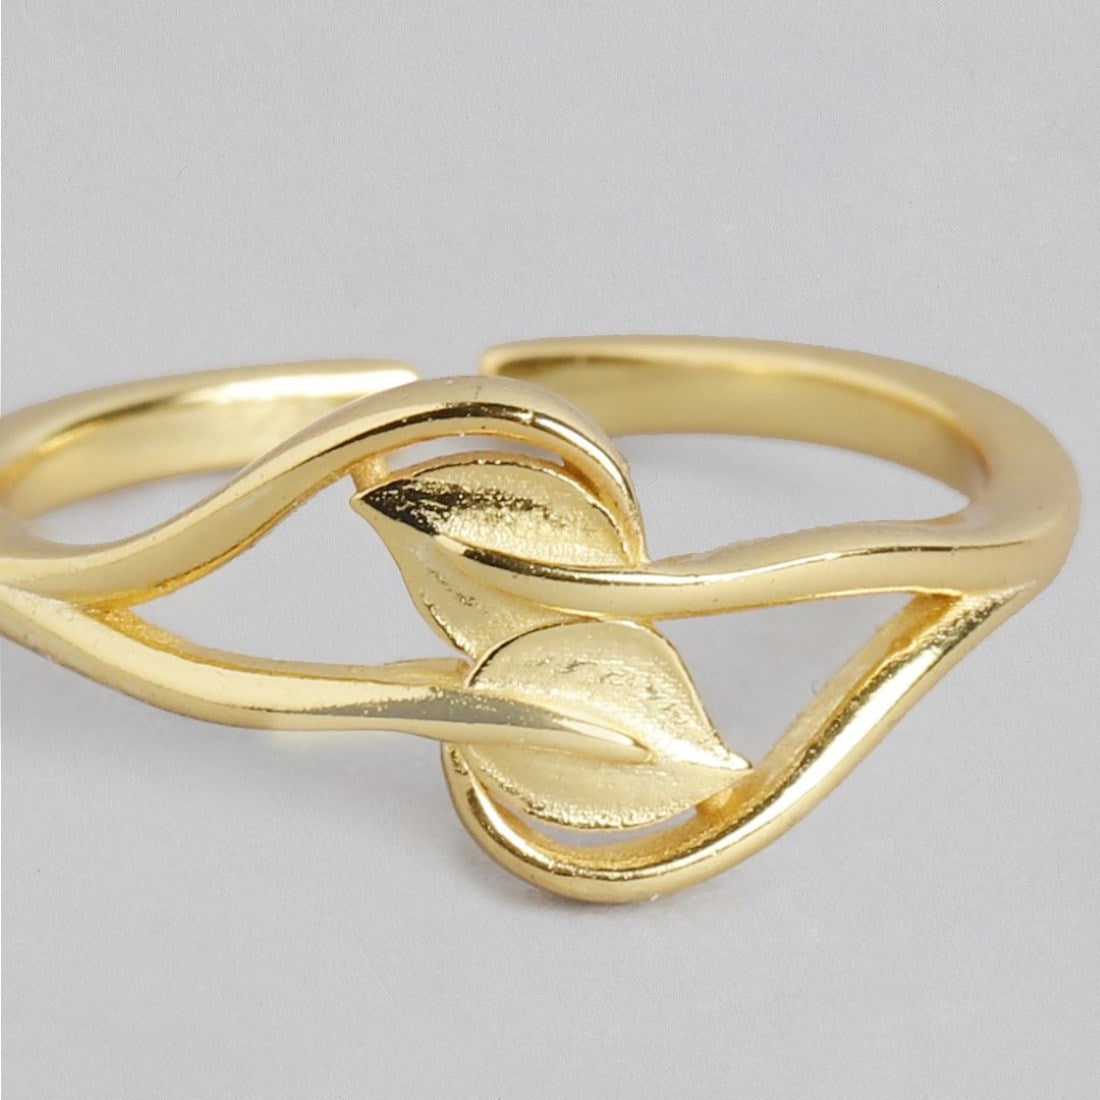 Golden Leafy Elegance 925 Sterling Silver Gold-Plated Women's Ring